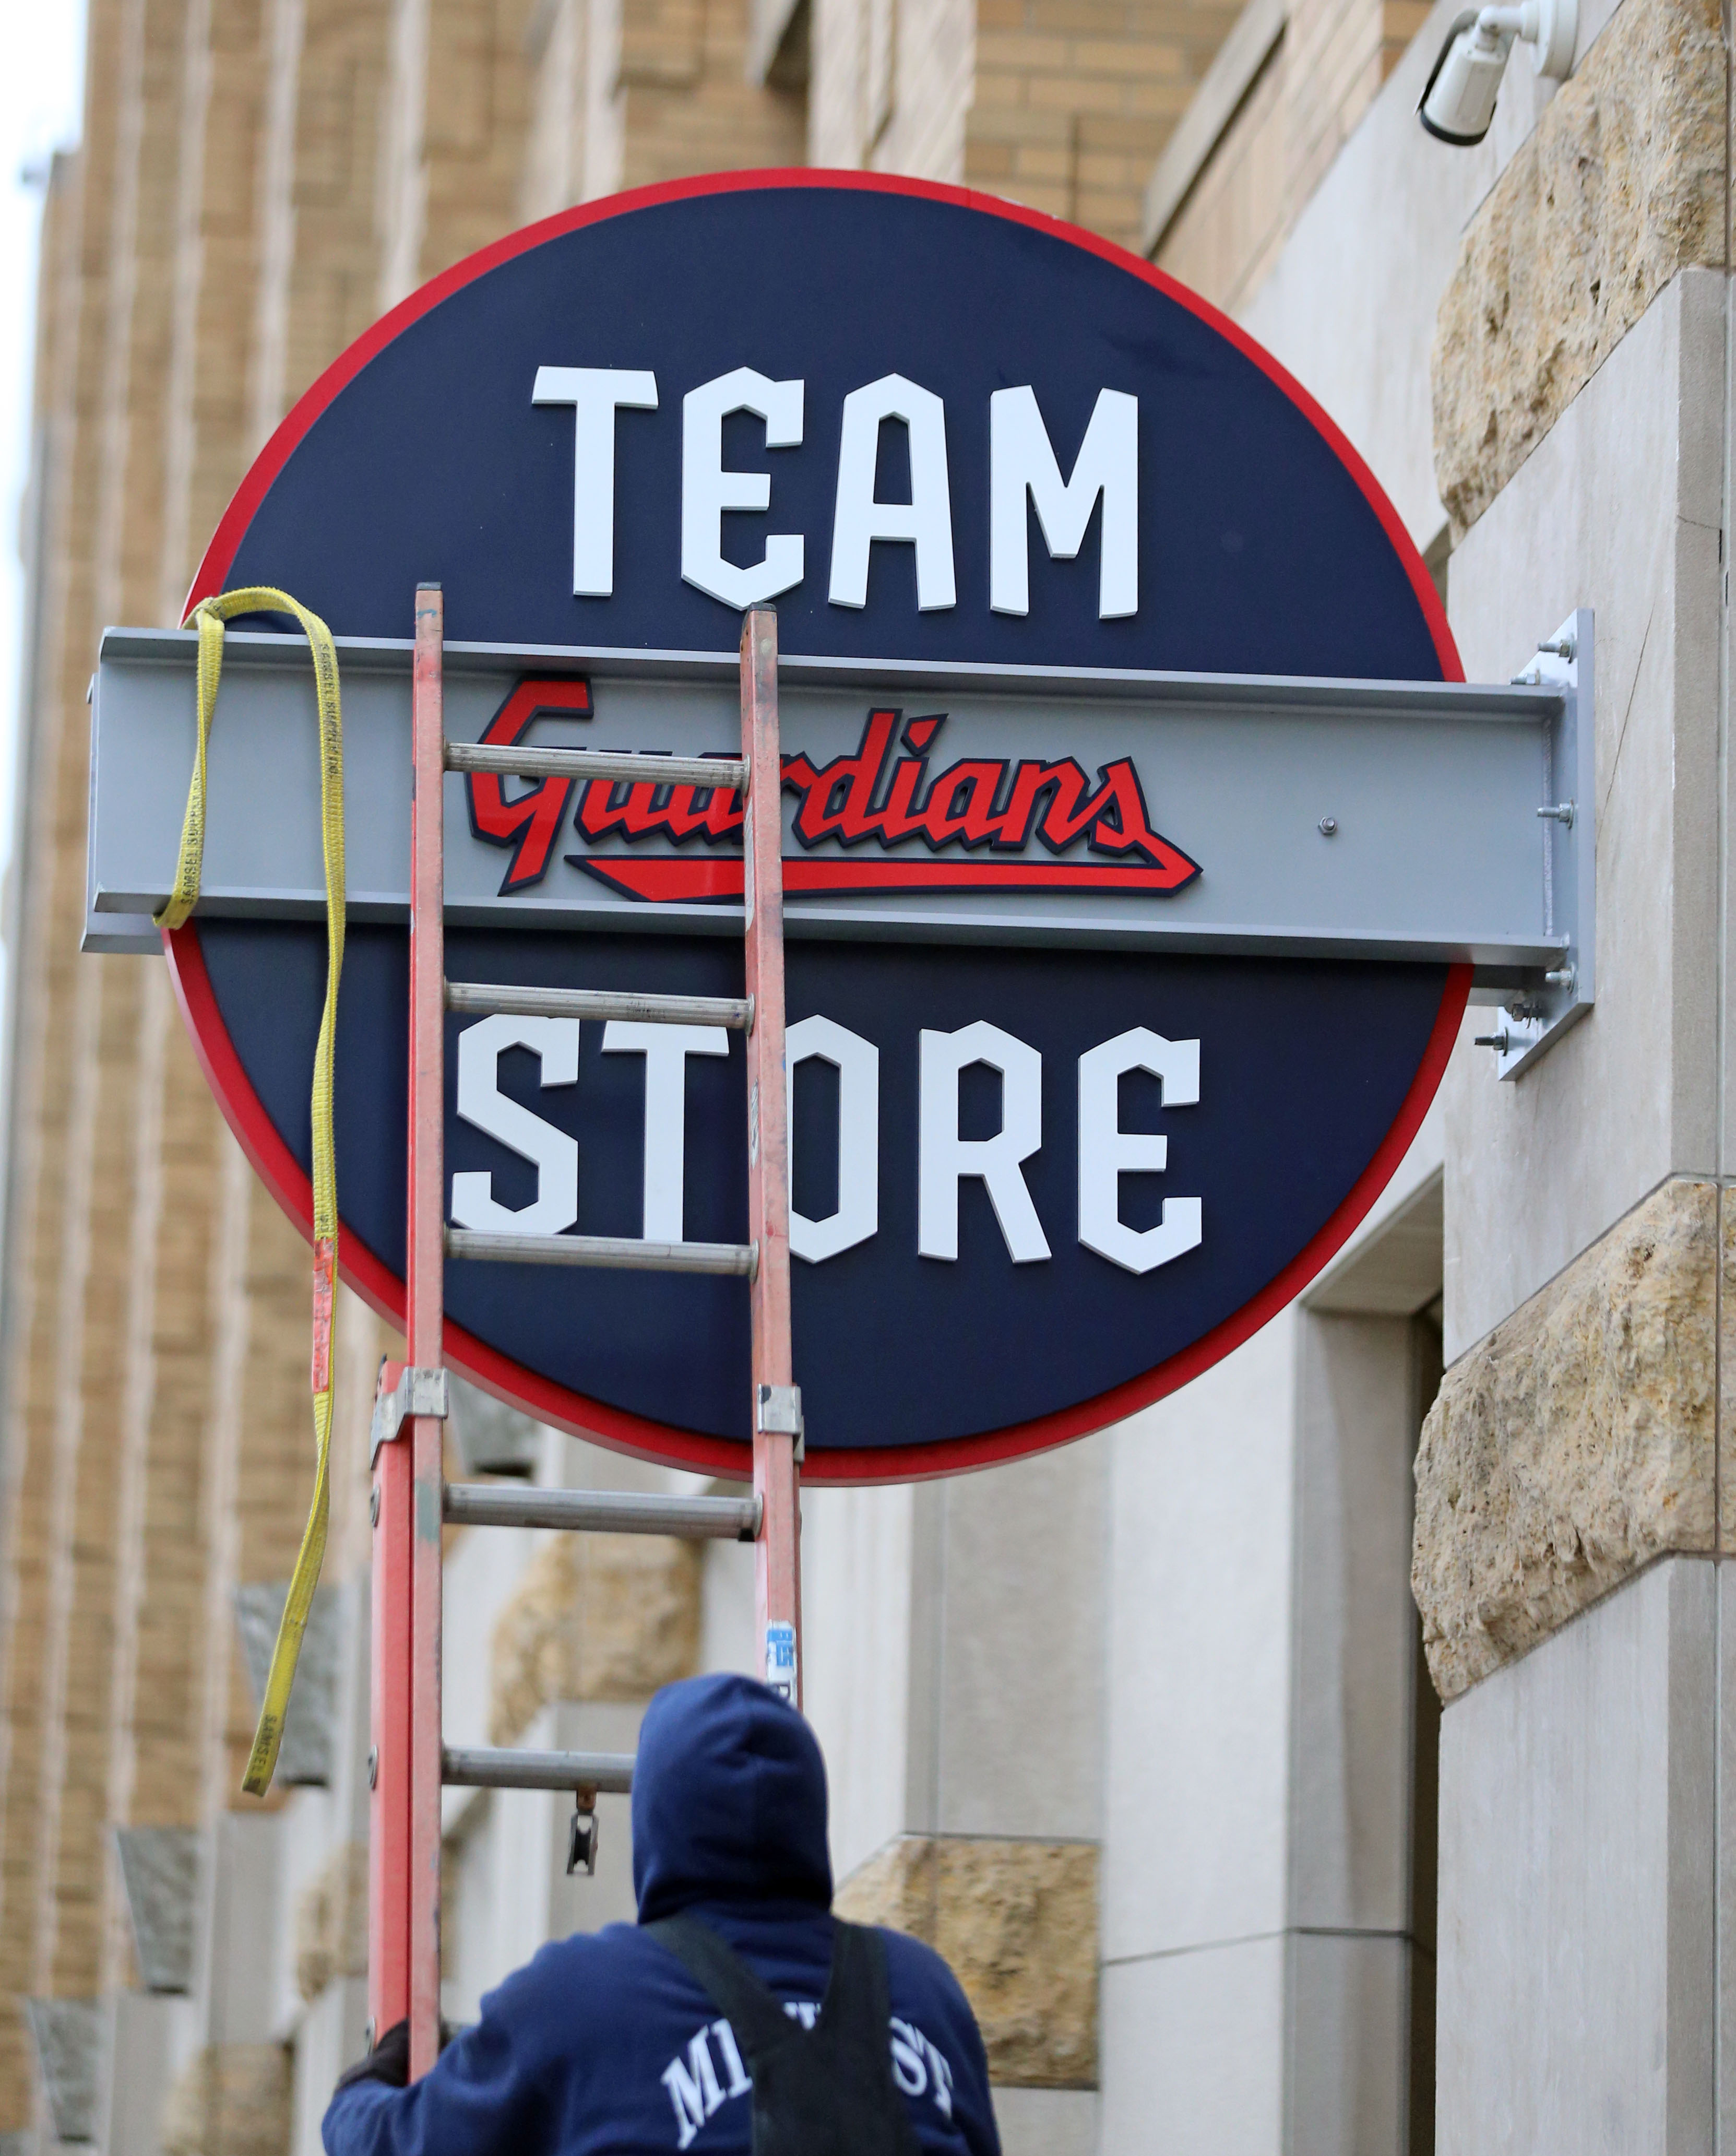 Marathon retail brand teams up with Cleveland Guardians as its